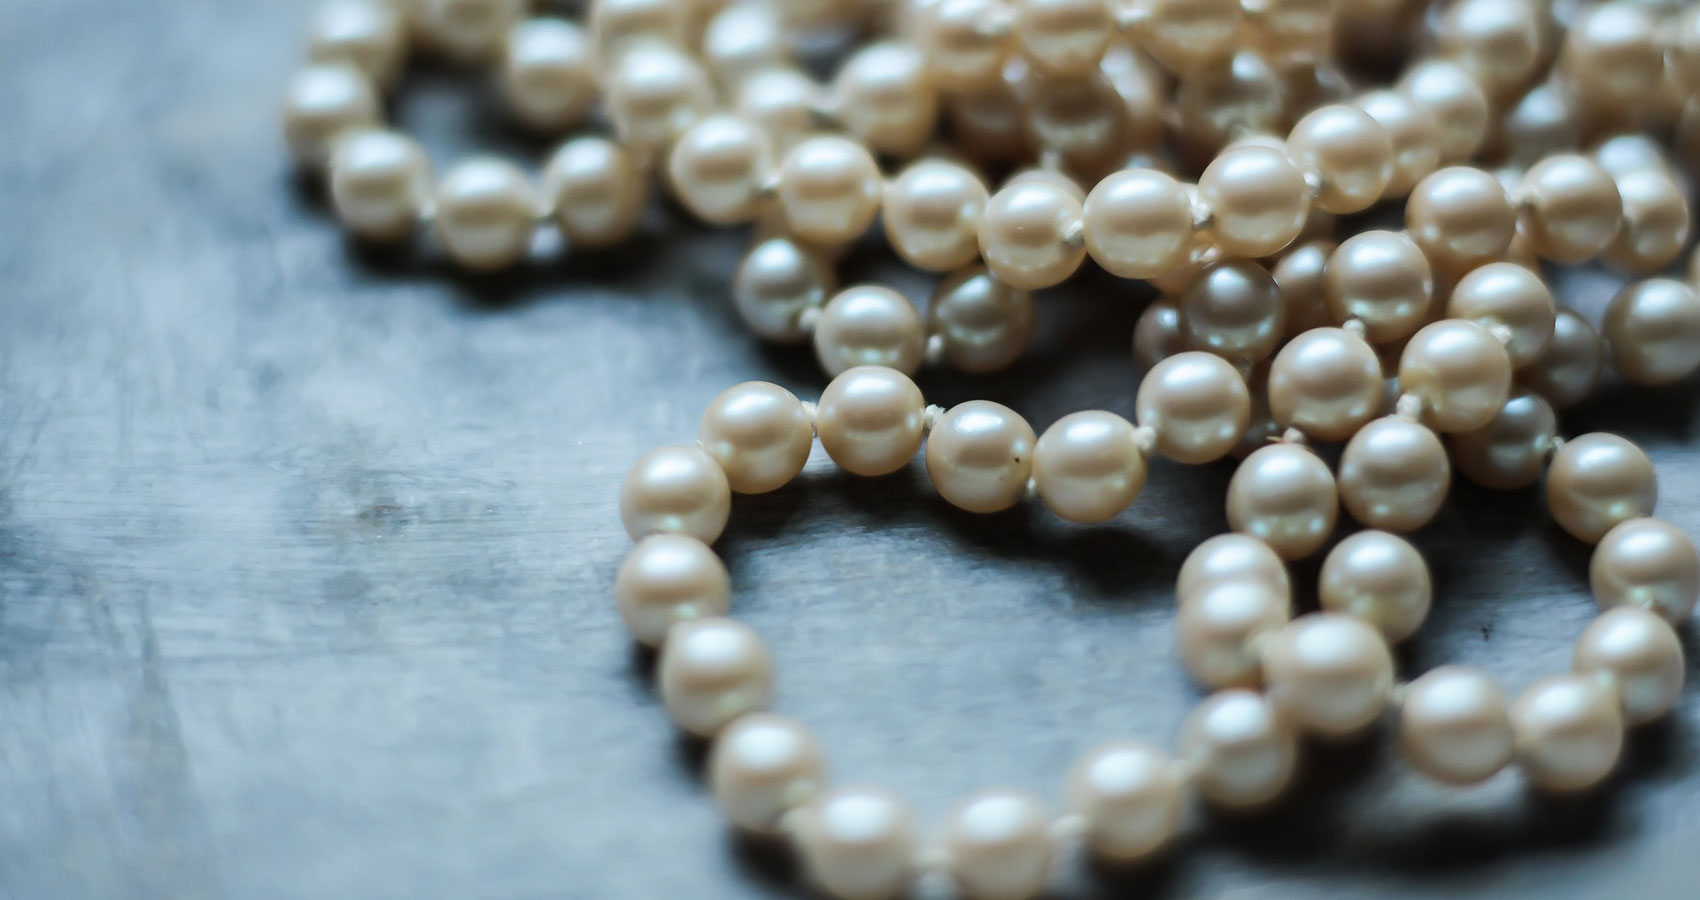 Haiku About Pearls and Pearl Divers, a haiku string written by Paweł Markiewicz at Spillwords.com